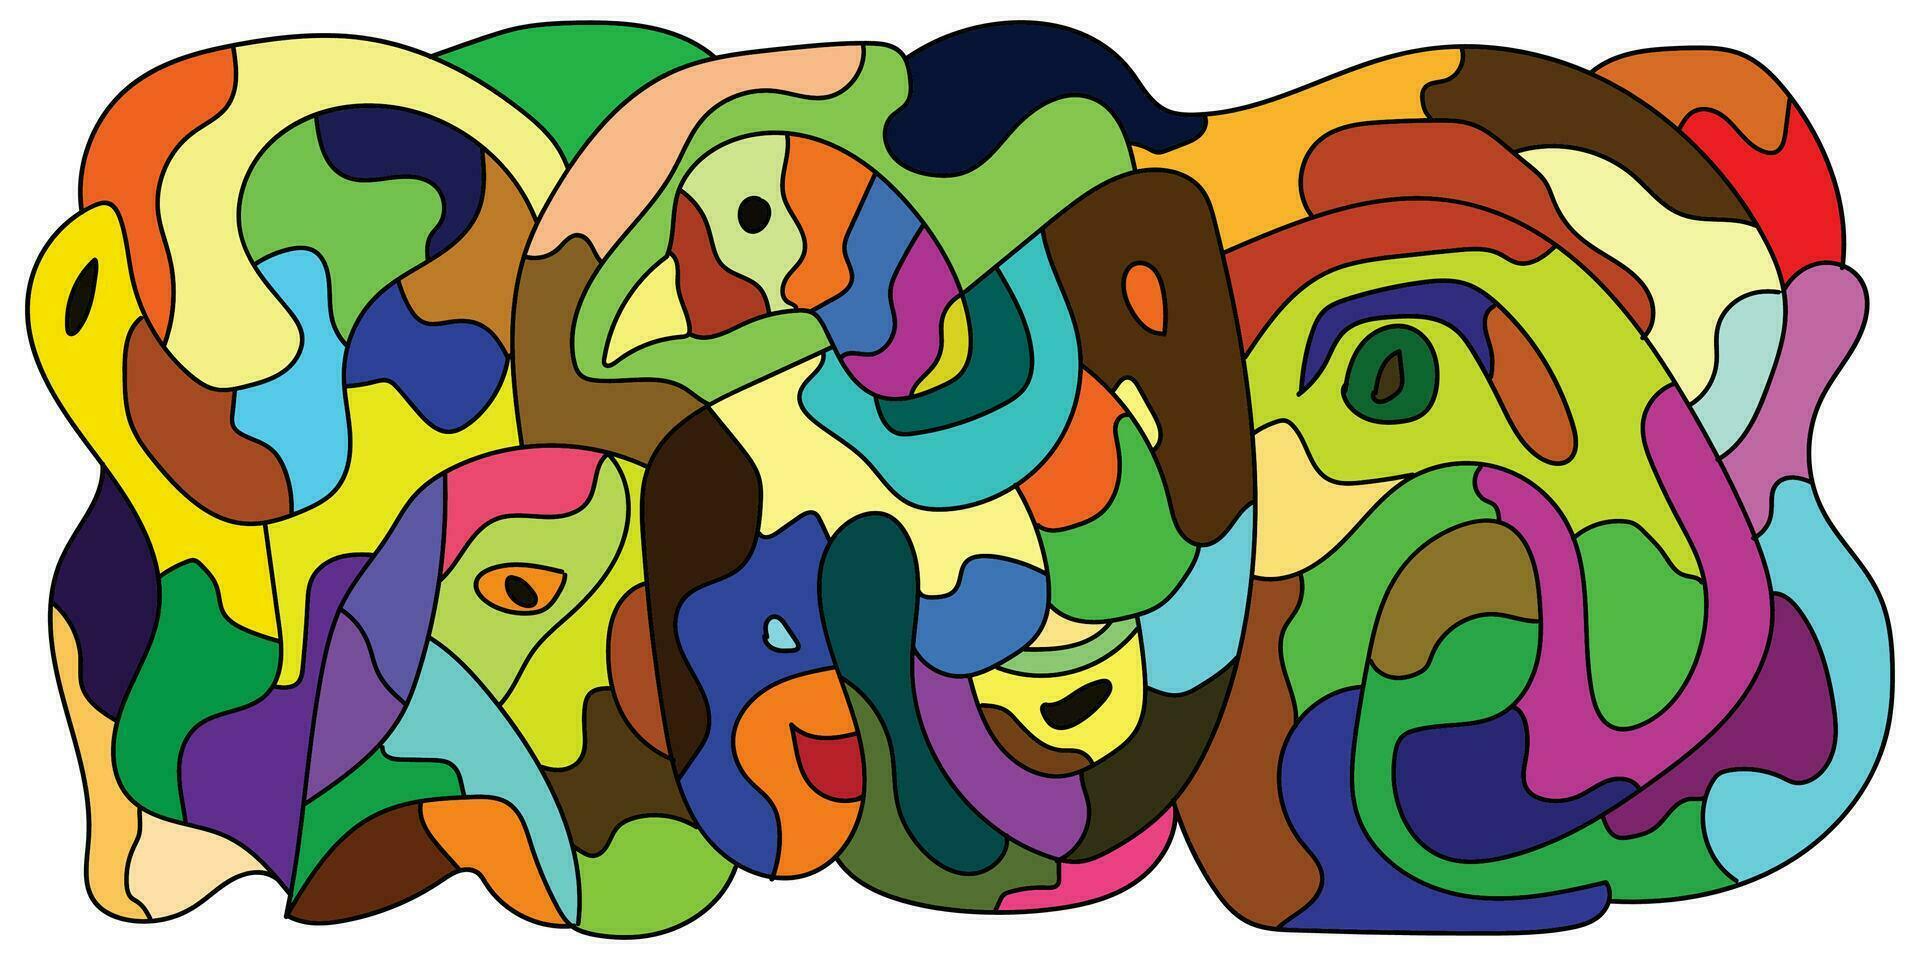 Abstract Background, Collection of Bird Faces and Colorful Eyes, Vector Illustration.